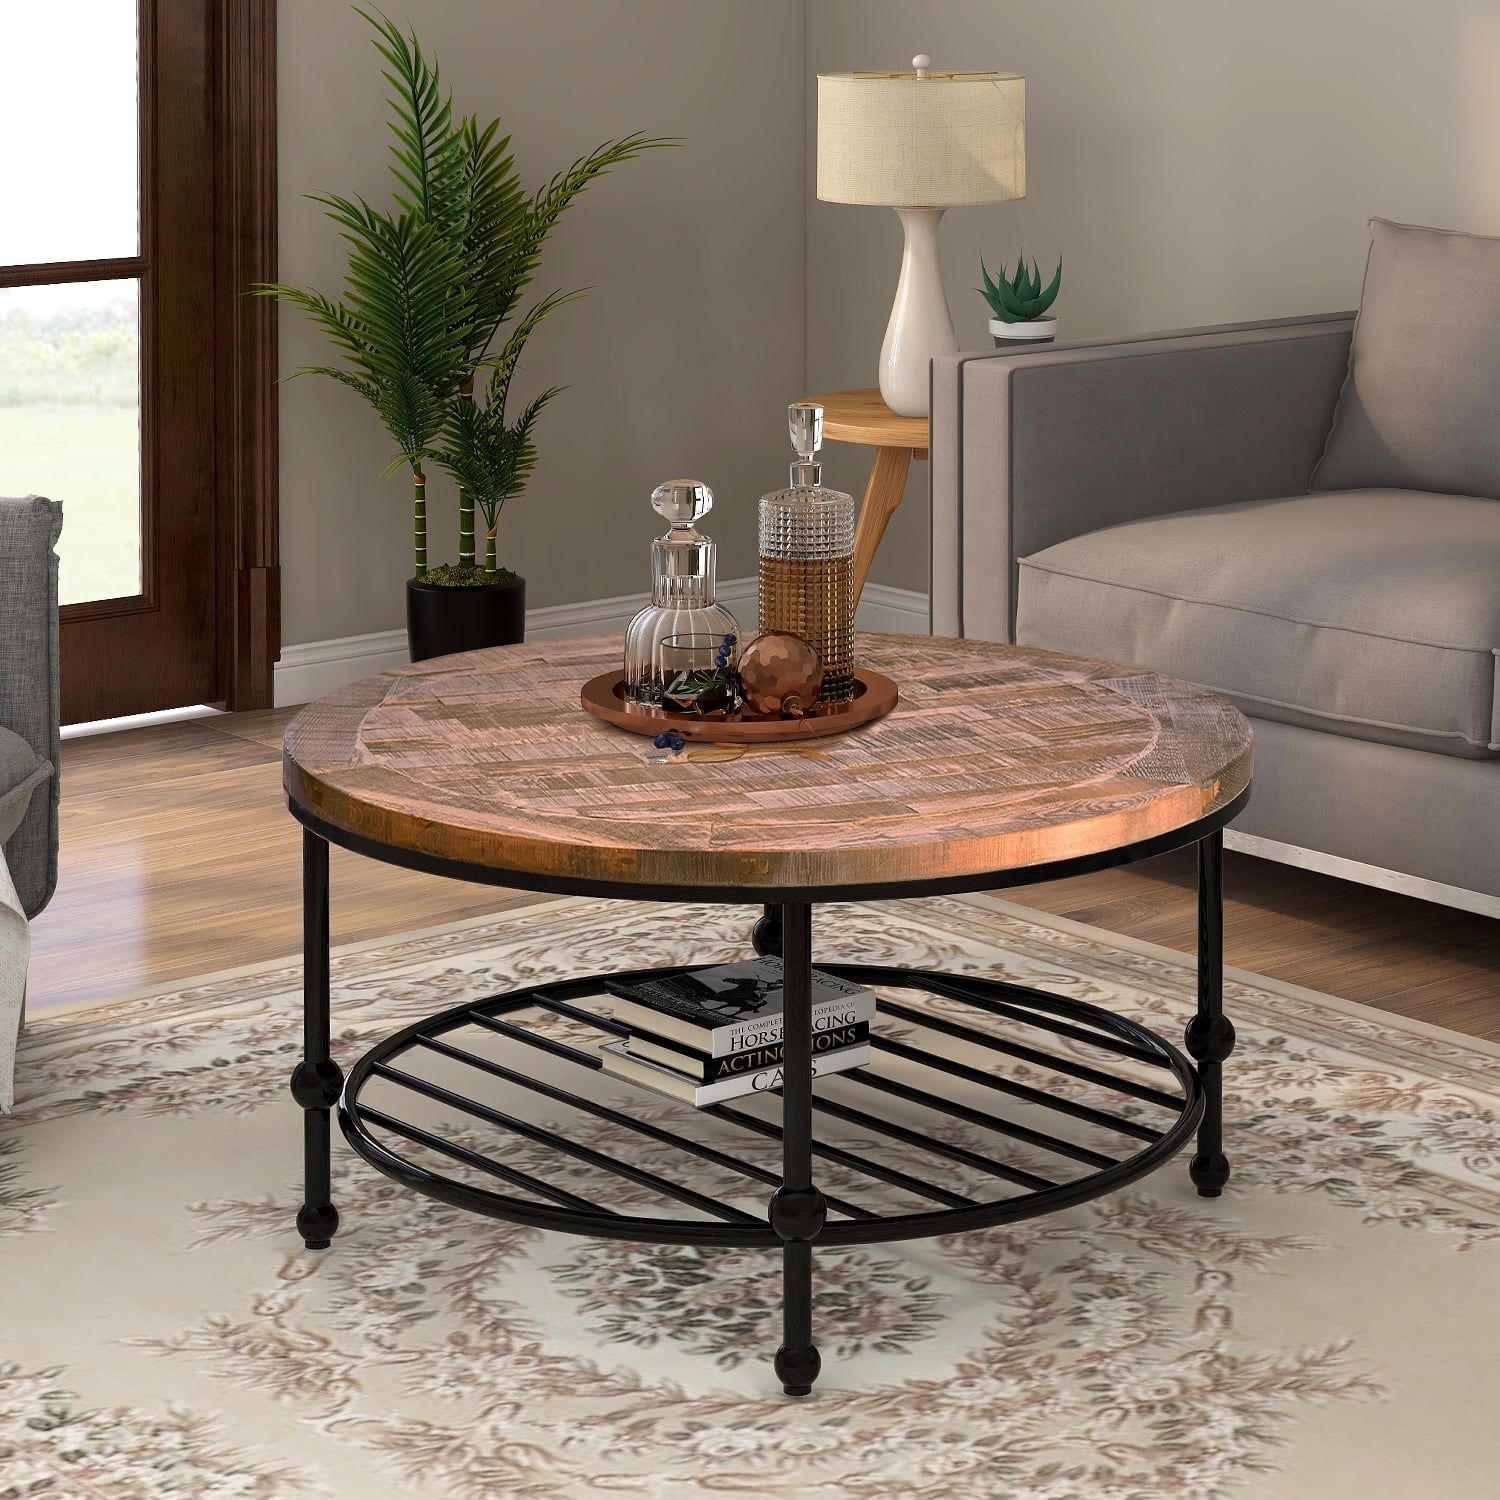 Rustic Natural Round Coffee Table With Storage Shelf For Living Room Inside Round Coffee Tables (Photo 7 of 15)